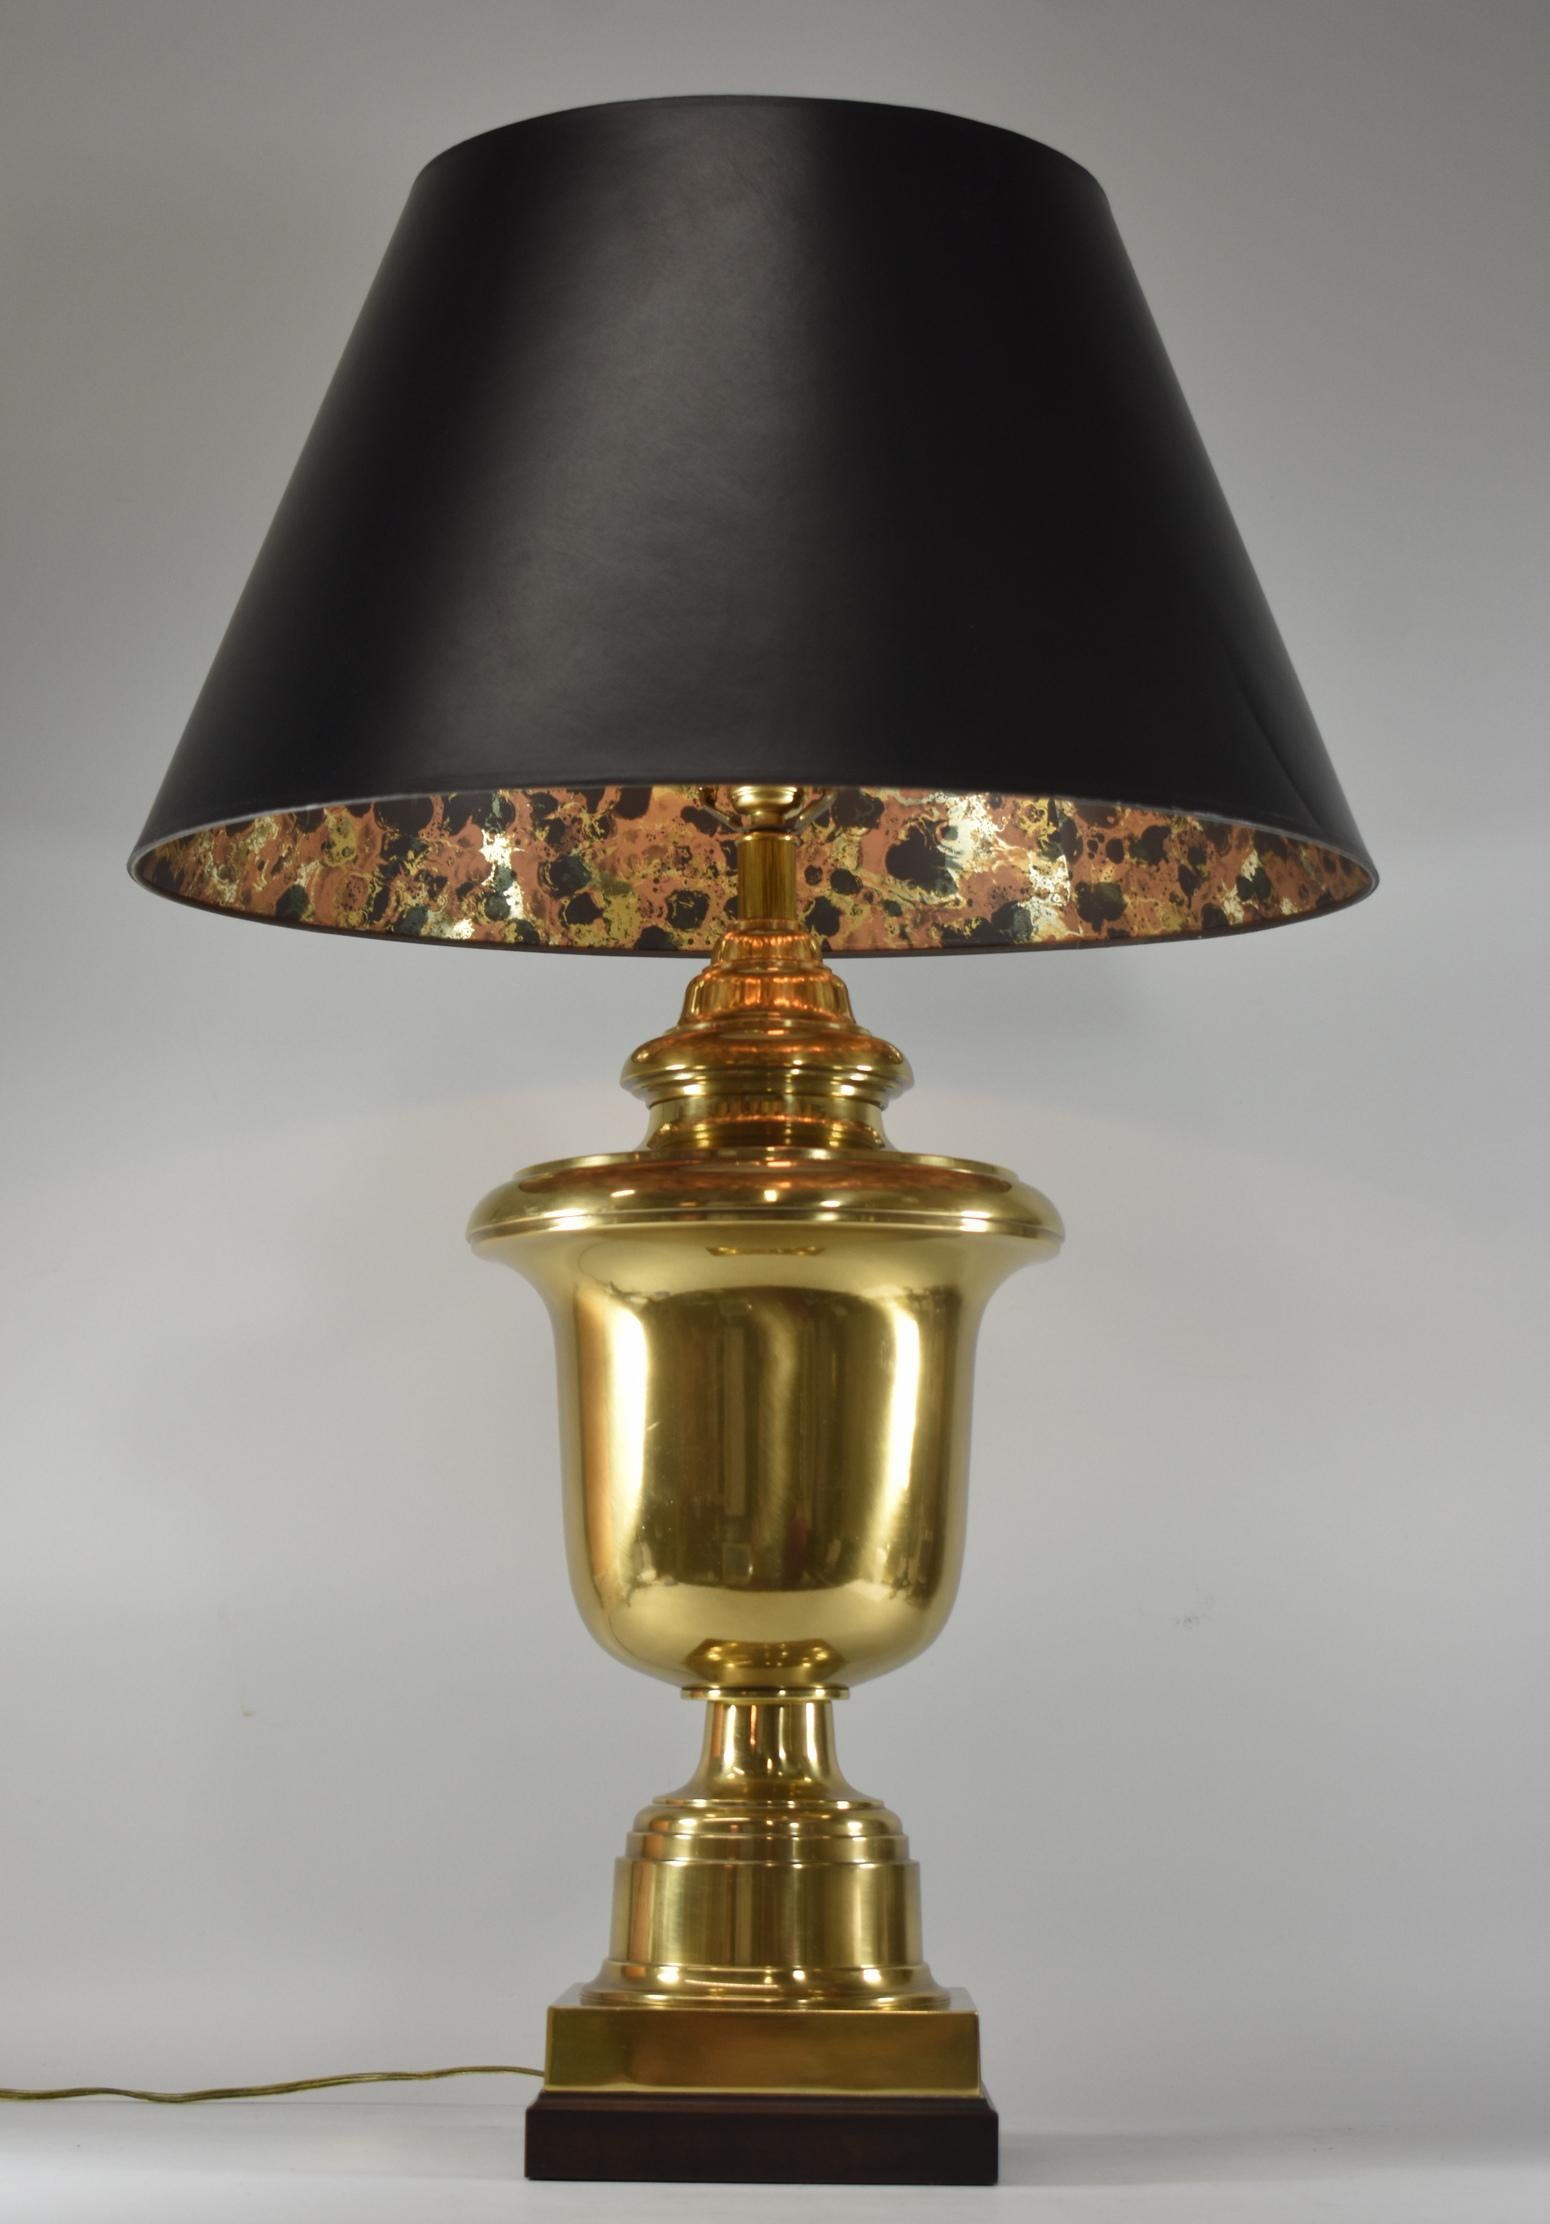 Vintage brass urn shaped table lamp by Fredrick Cooper of Chicago. It is accented with a dark wood base. The shade is also Fredrick Cooper. Both lamp and shade are in very good vintage condition with only light surface wear. It measures 34